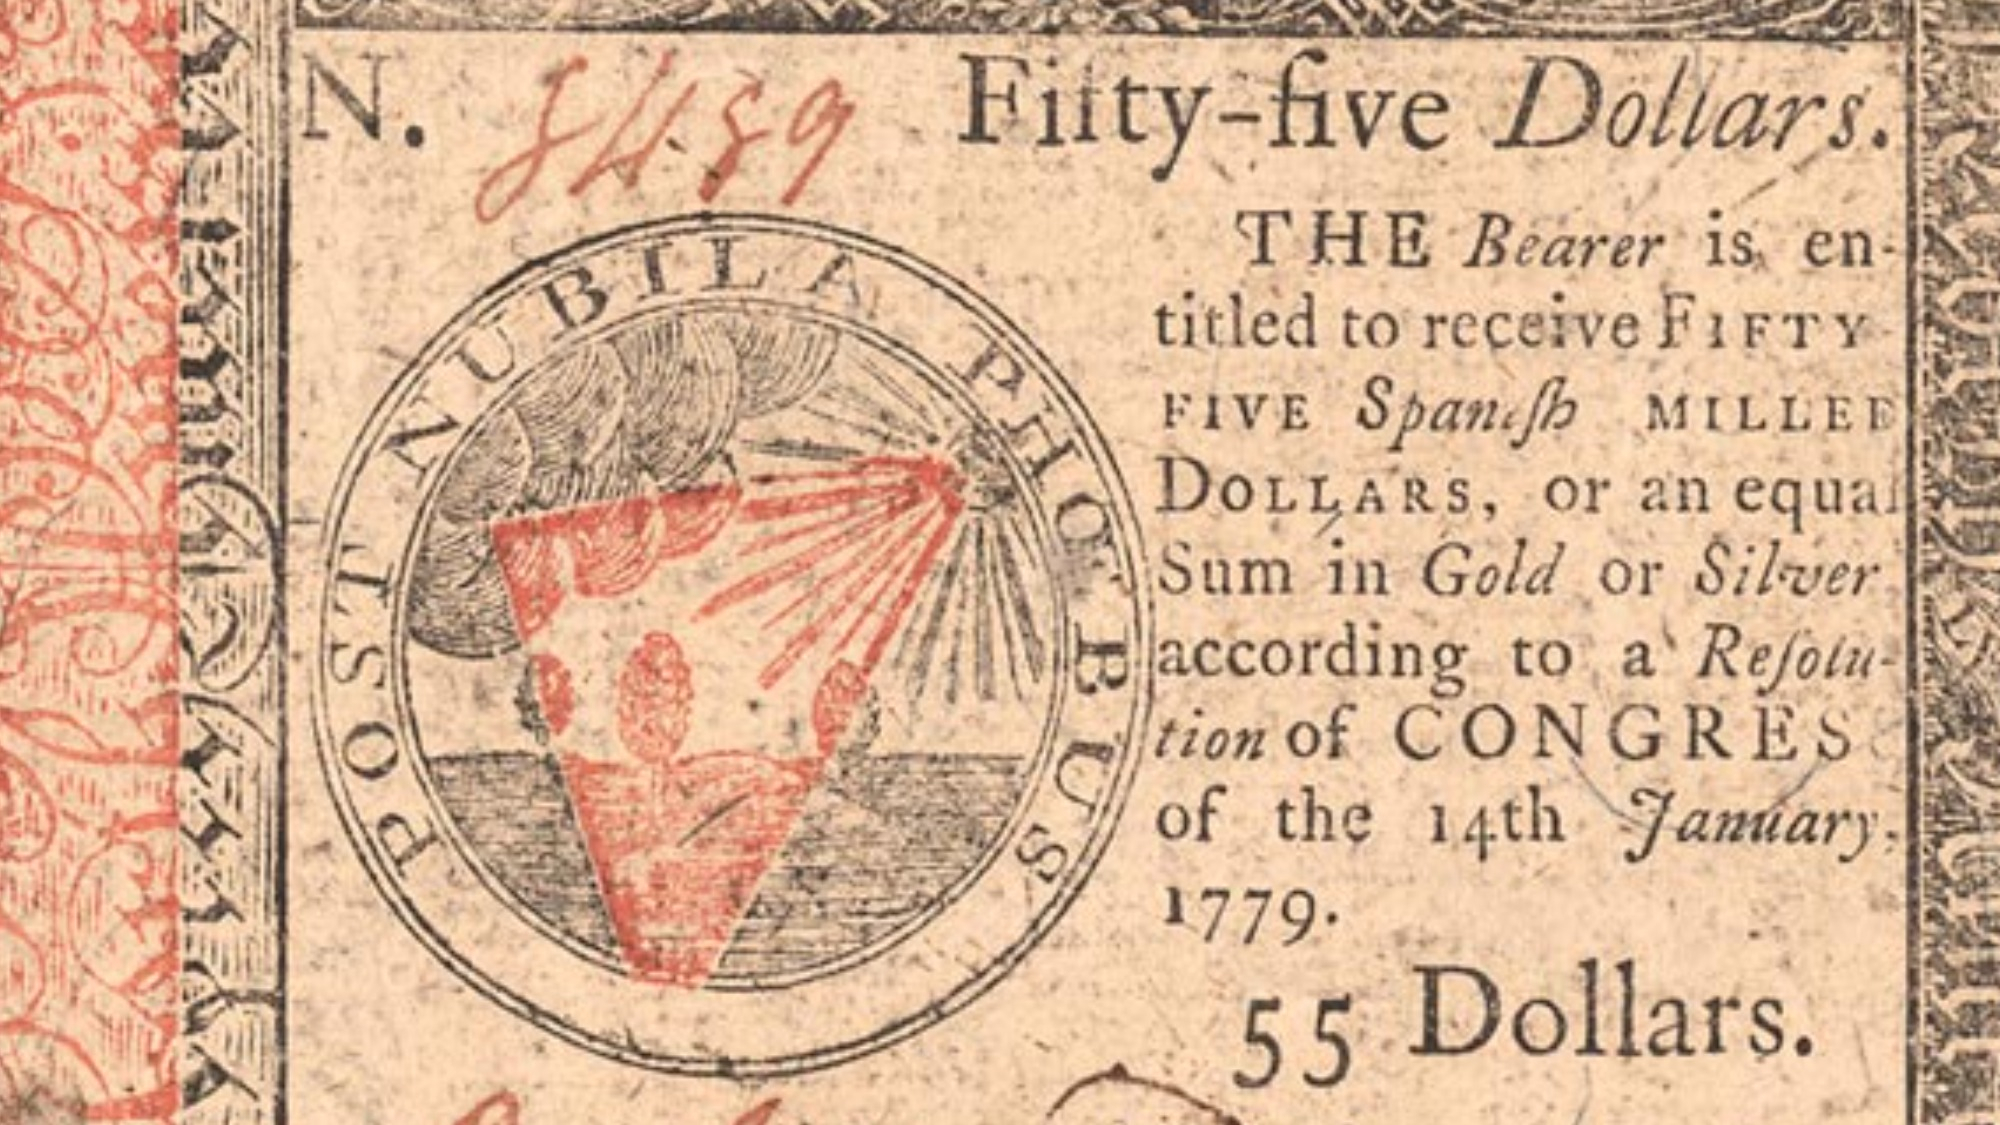 Benjamin Franklin used science to protect his money from counterfeiters